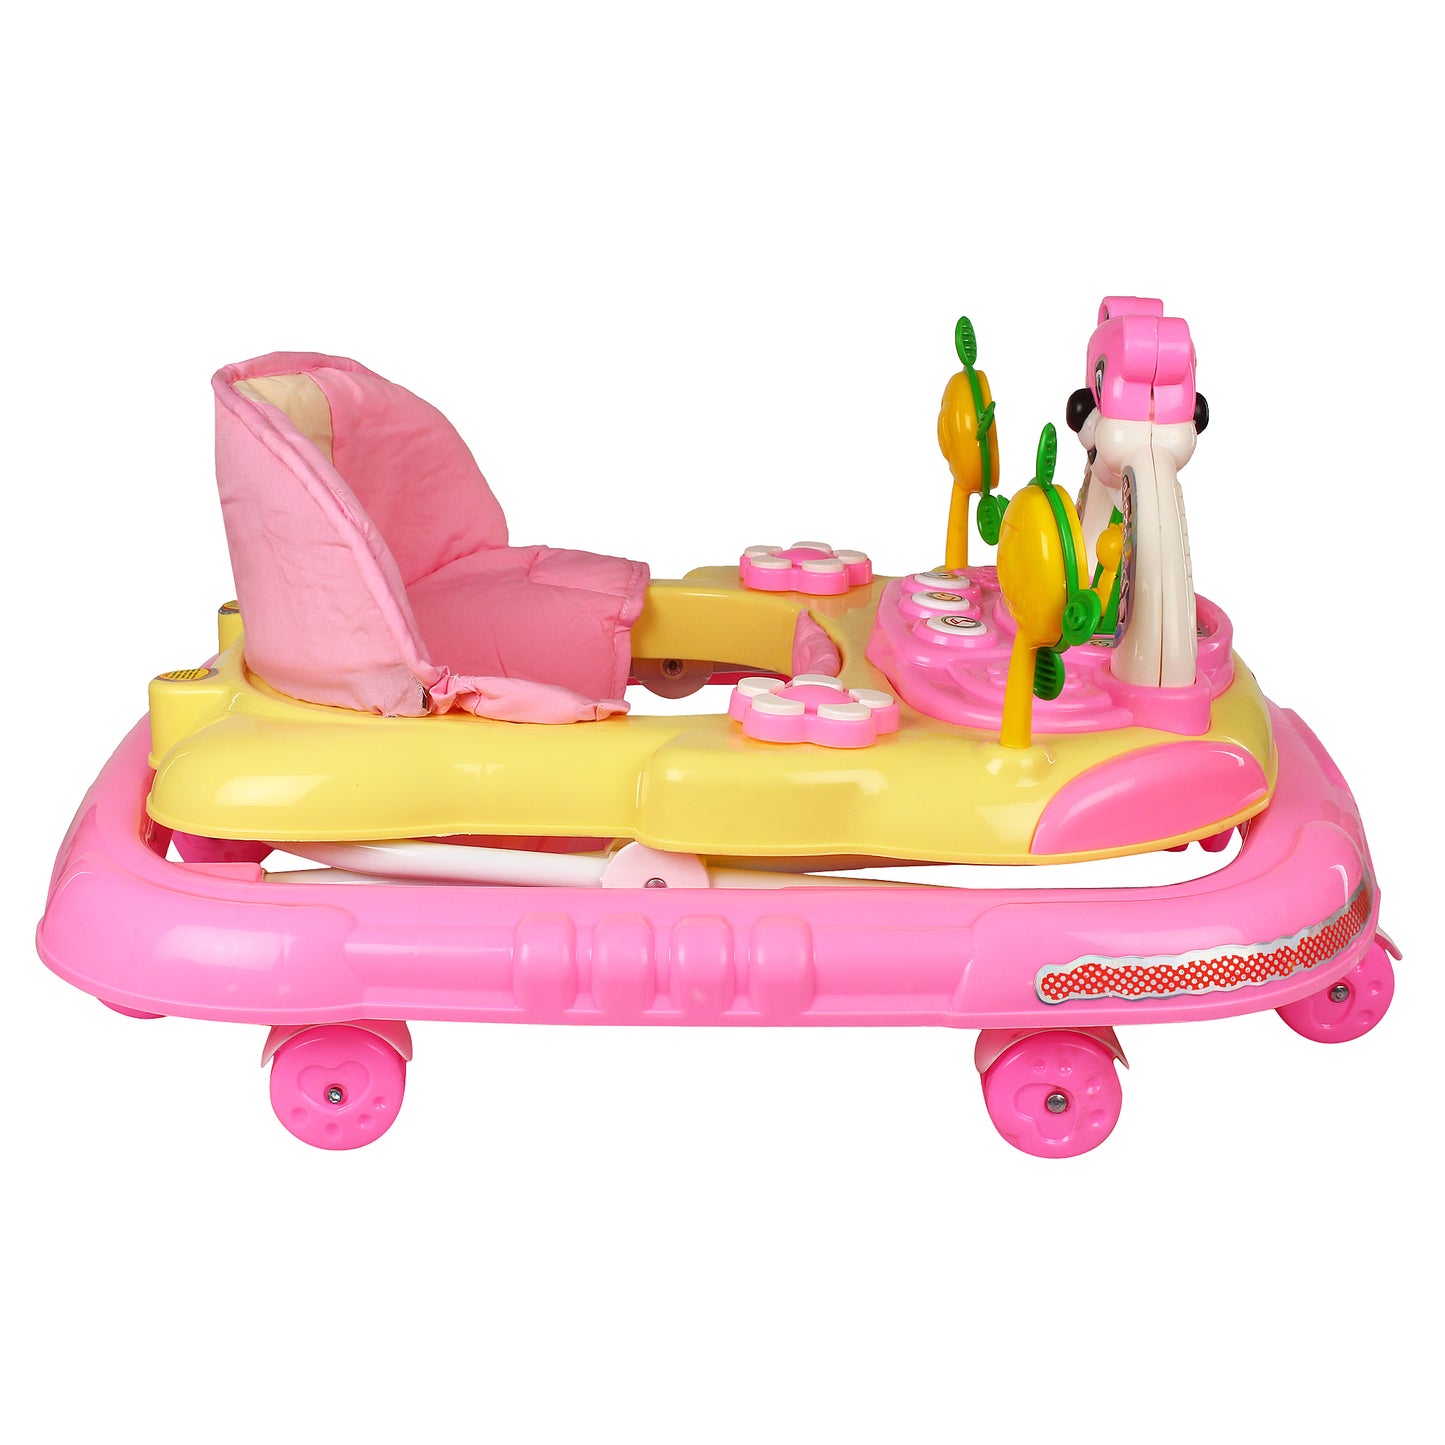 Goyal's Baby Musical Walker - Foldable & Height Adjustable - Pink (Made in India)